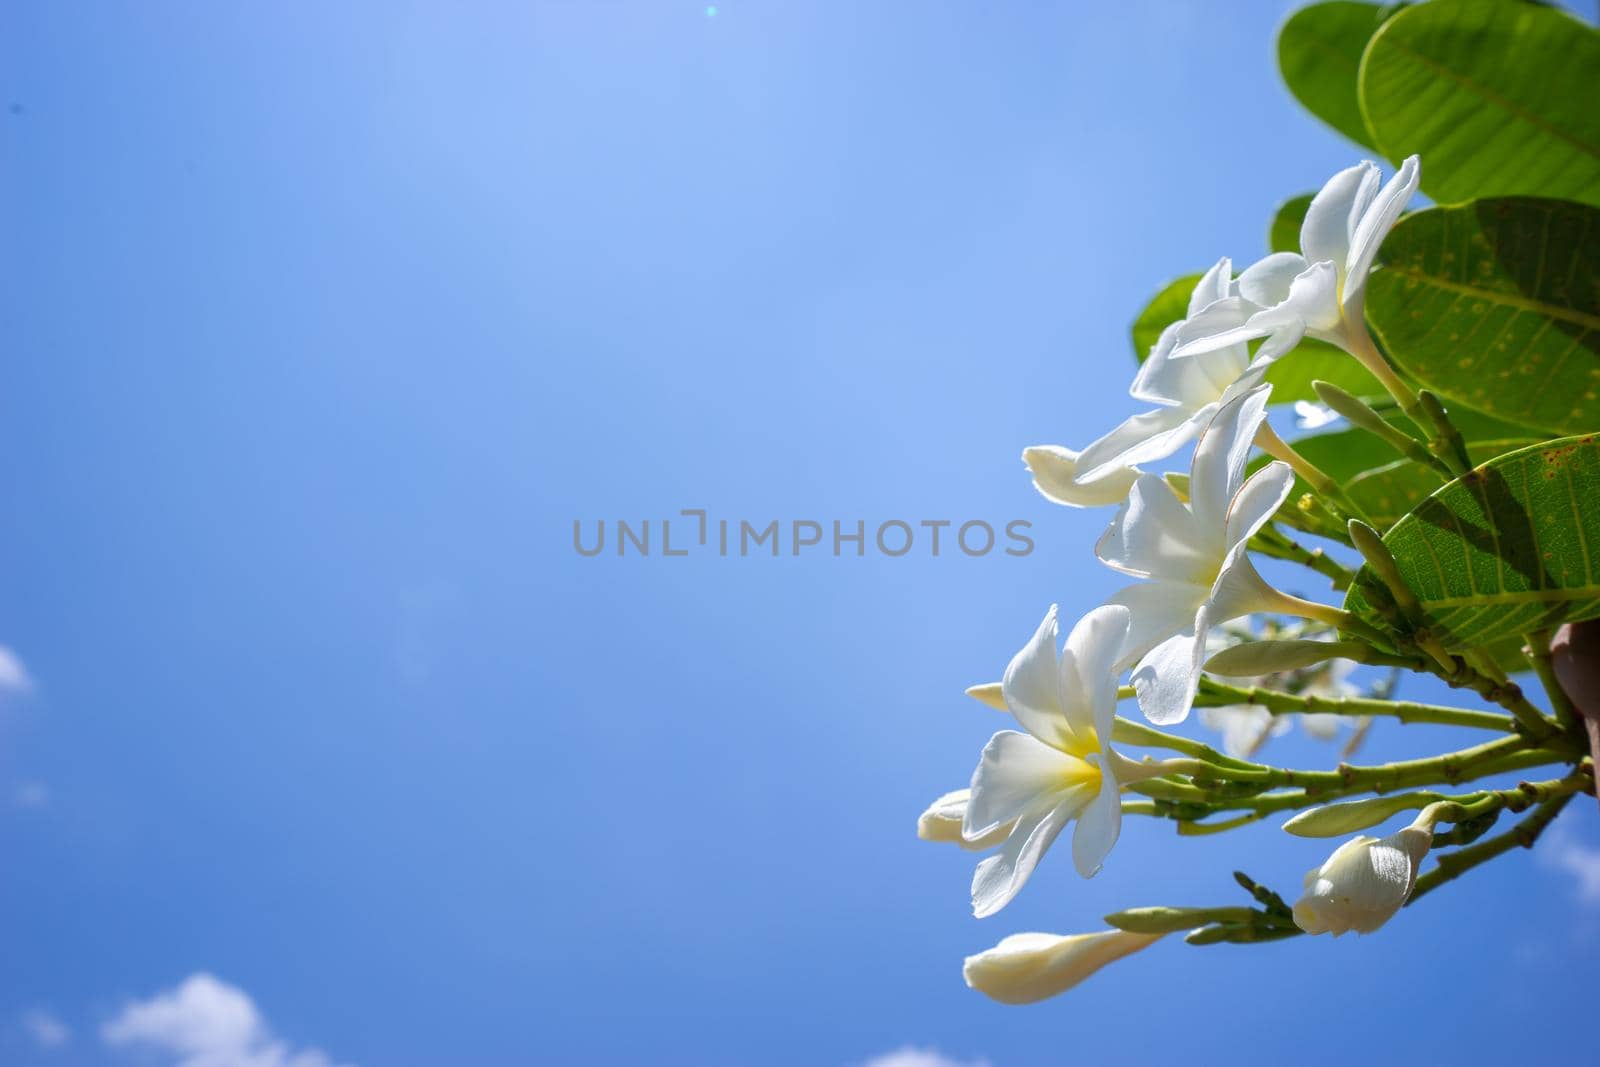 Plumeria flowers are White and Yellow are Blossoming on tree with blue sky